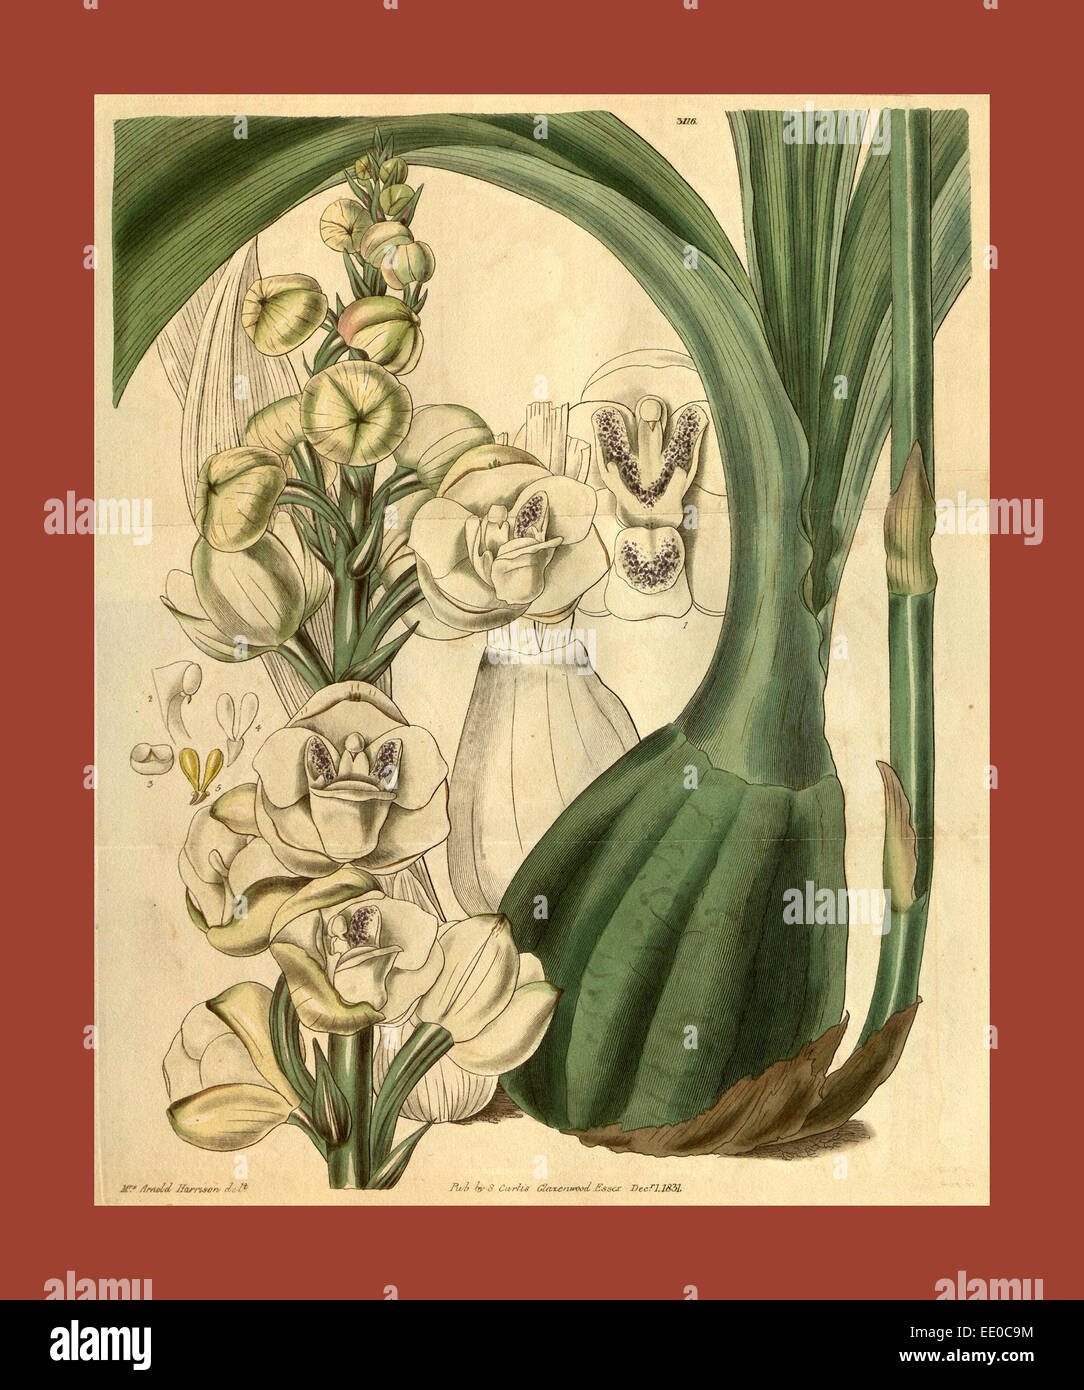 19th century botanical colour print. Botanical illustration. Form, colour, and details of the plant as an art piece Stock Photo